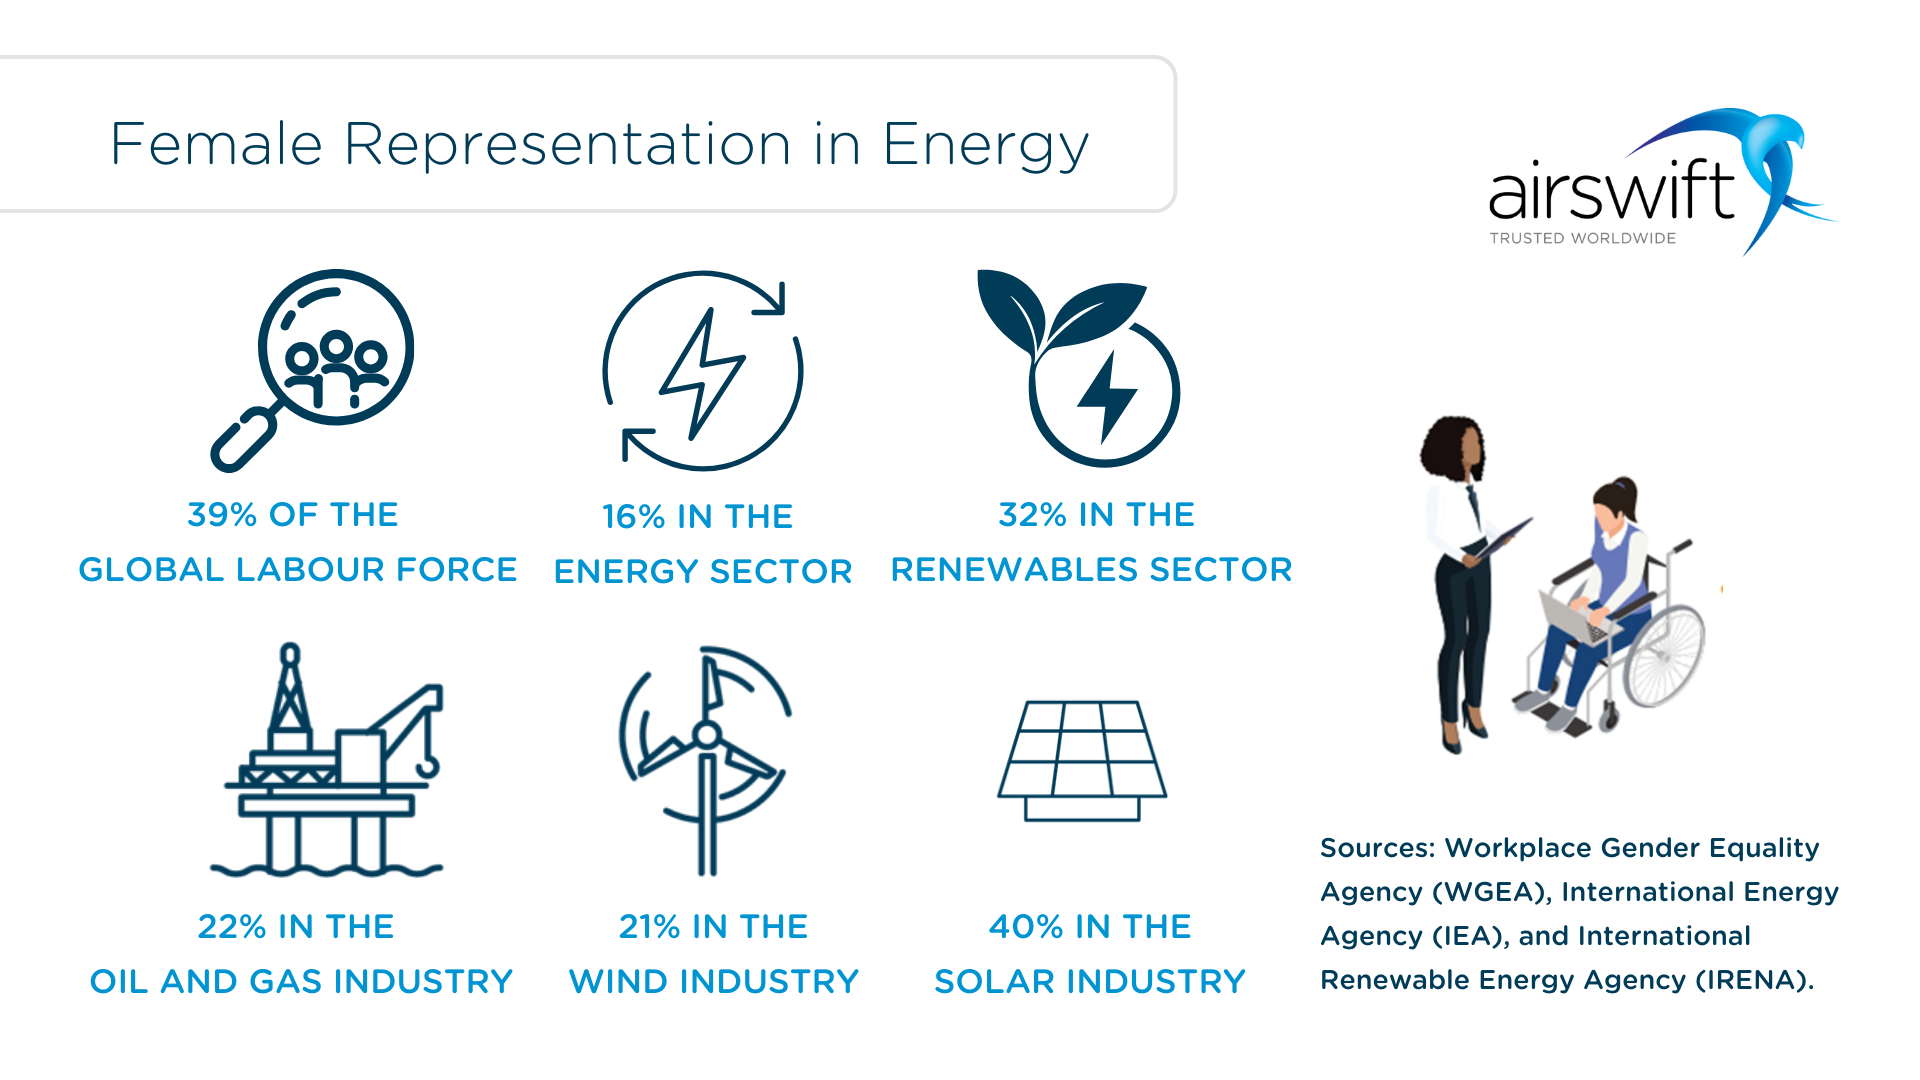 The image provides a visual representation of female participation in the energy sector. 